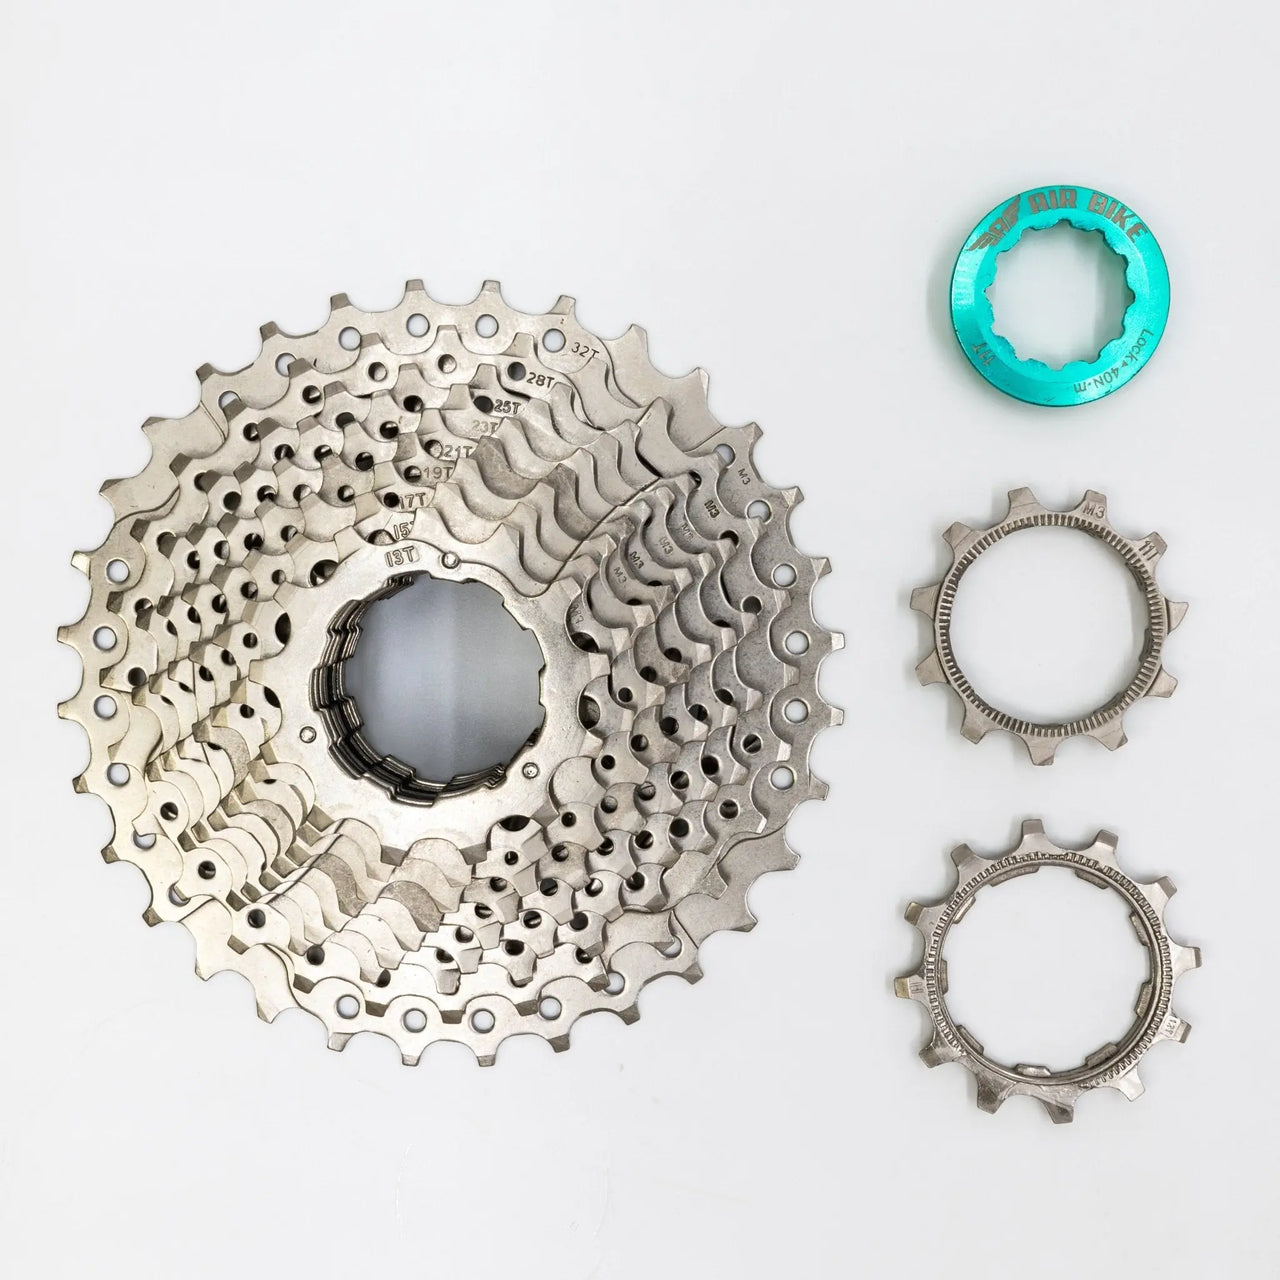 11 Speed 11-32T Cassette For Mountain Bike MTB & Road fits Shimano/Sram - Air BikeBicycle Cassettes & Freewheels